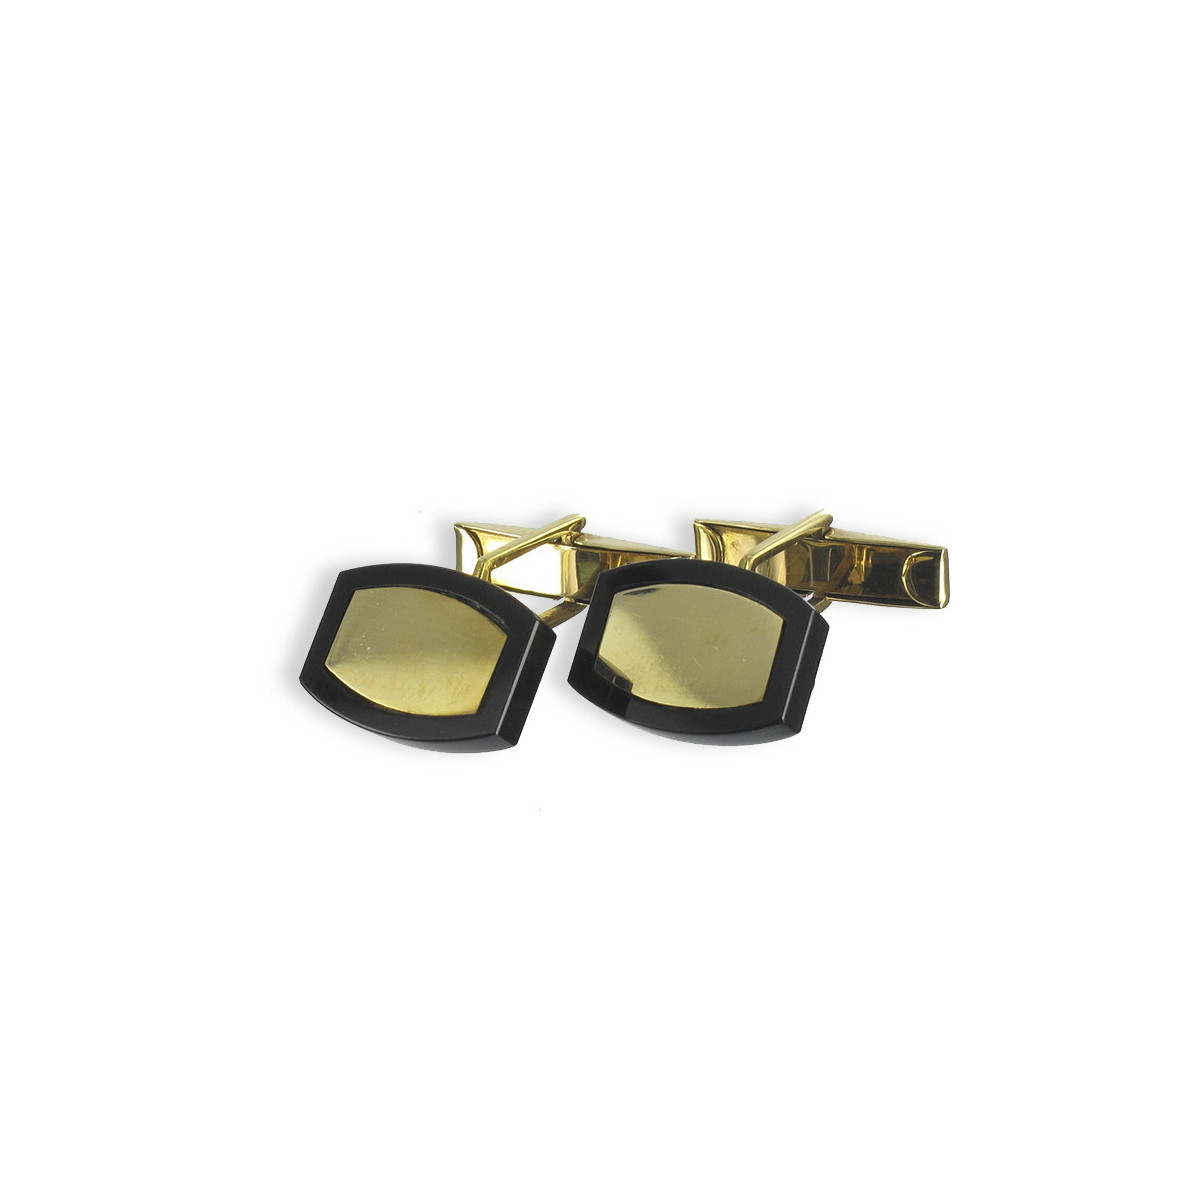 YELLOW GOLD AND ONYX CUFFLINKS